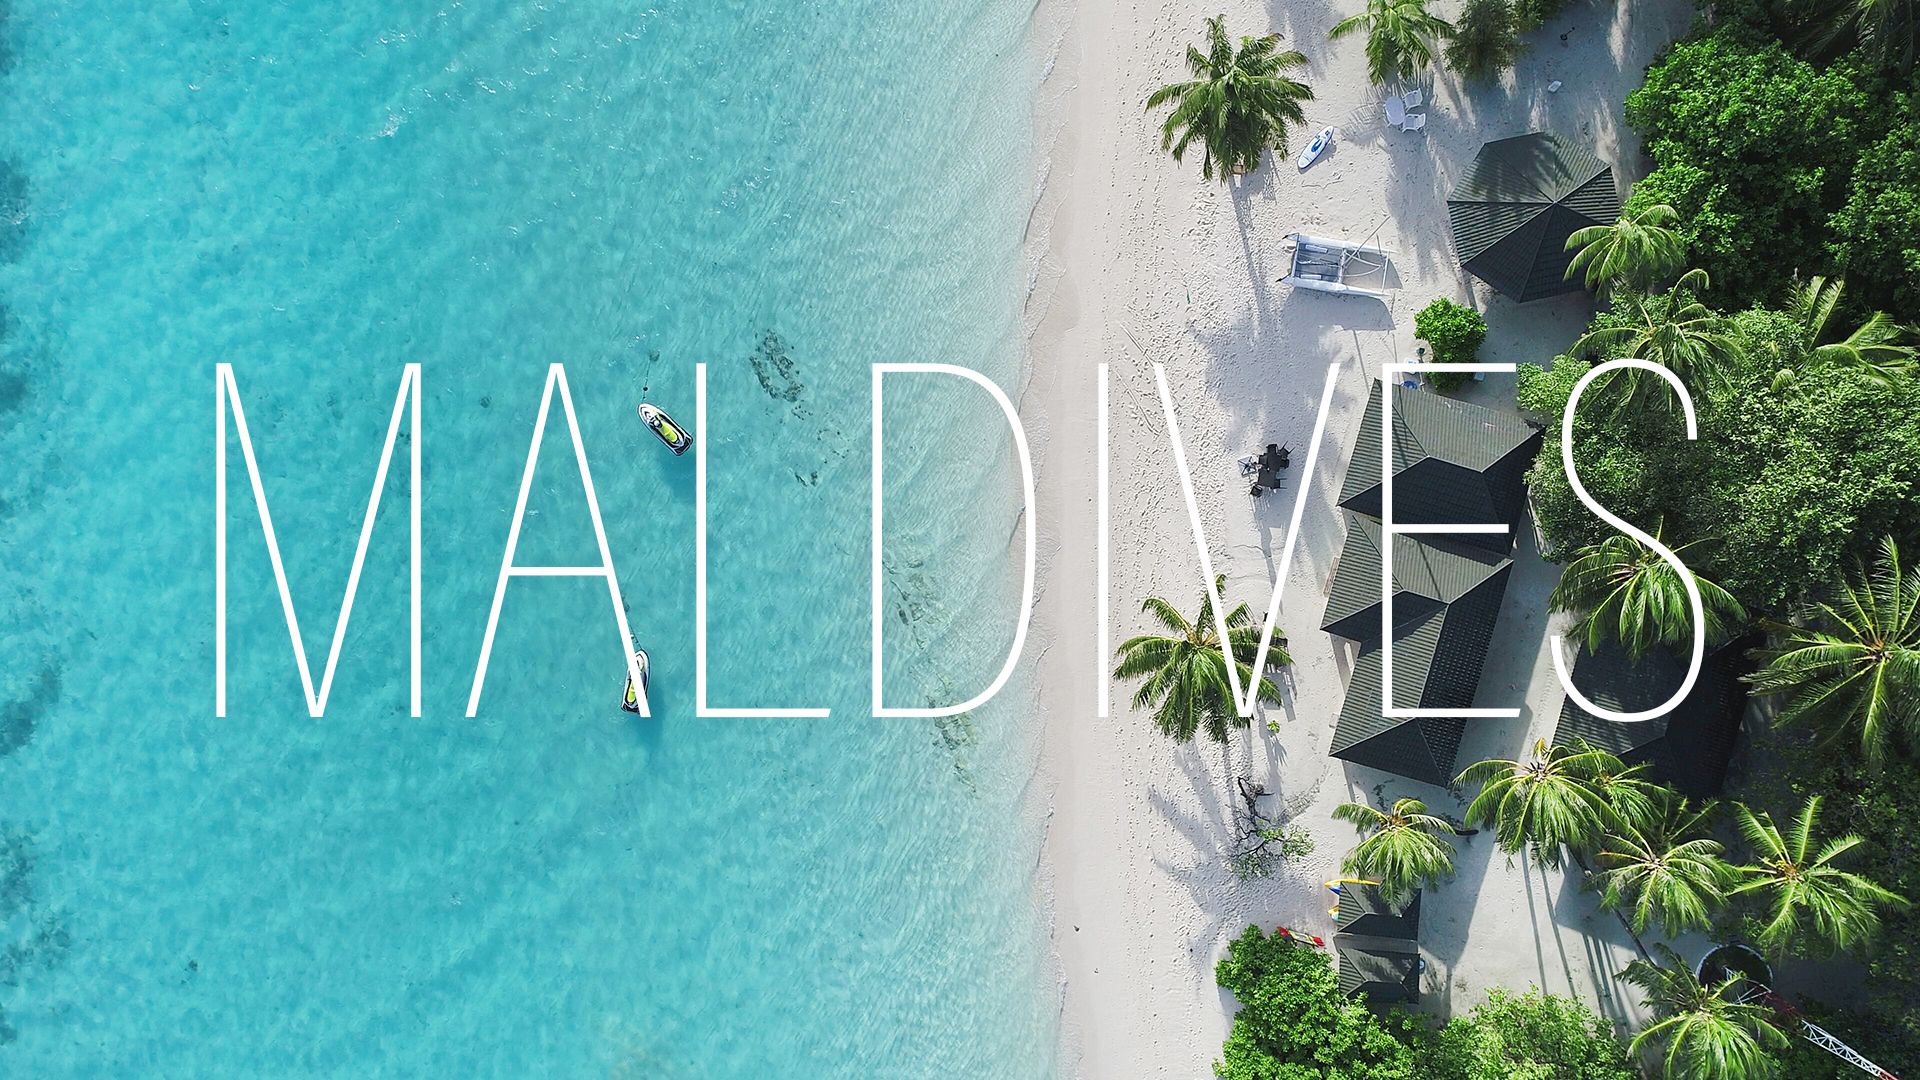 When nothing but white sand and tropical bliss will do, it’s hard to look past the Maldives.